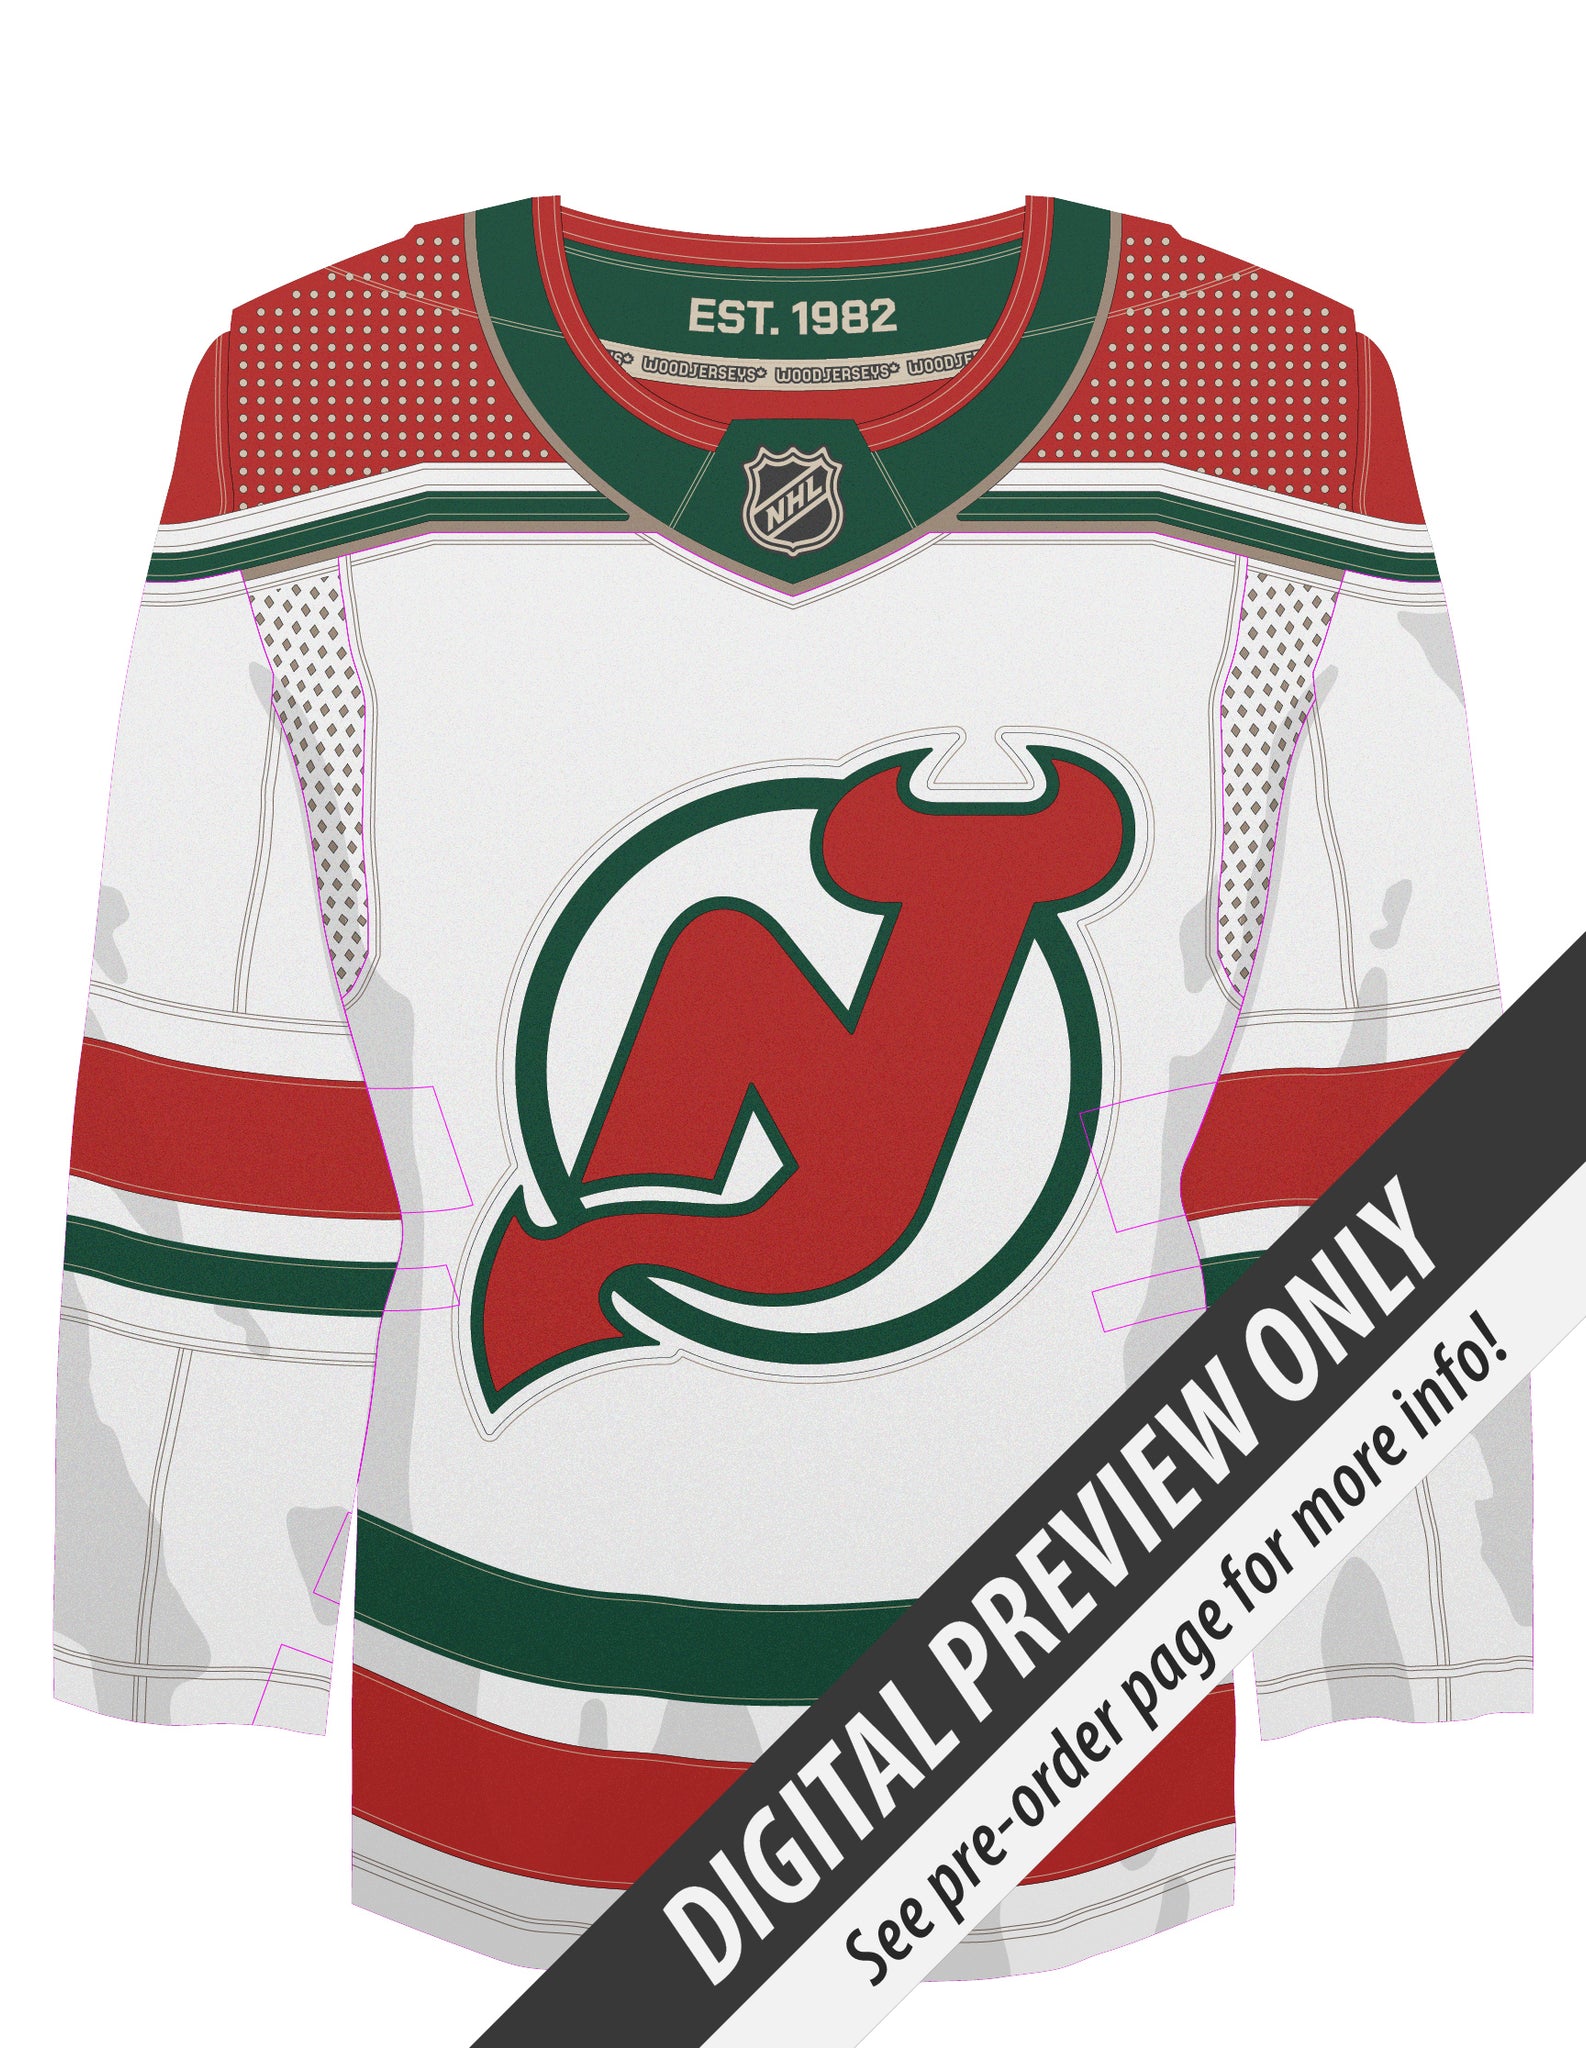 New Jersey Devils Heritage WoodJersey